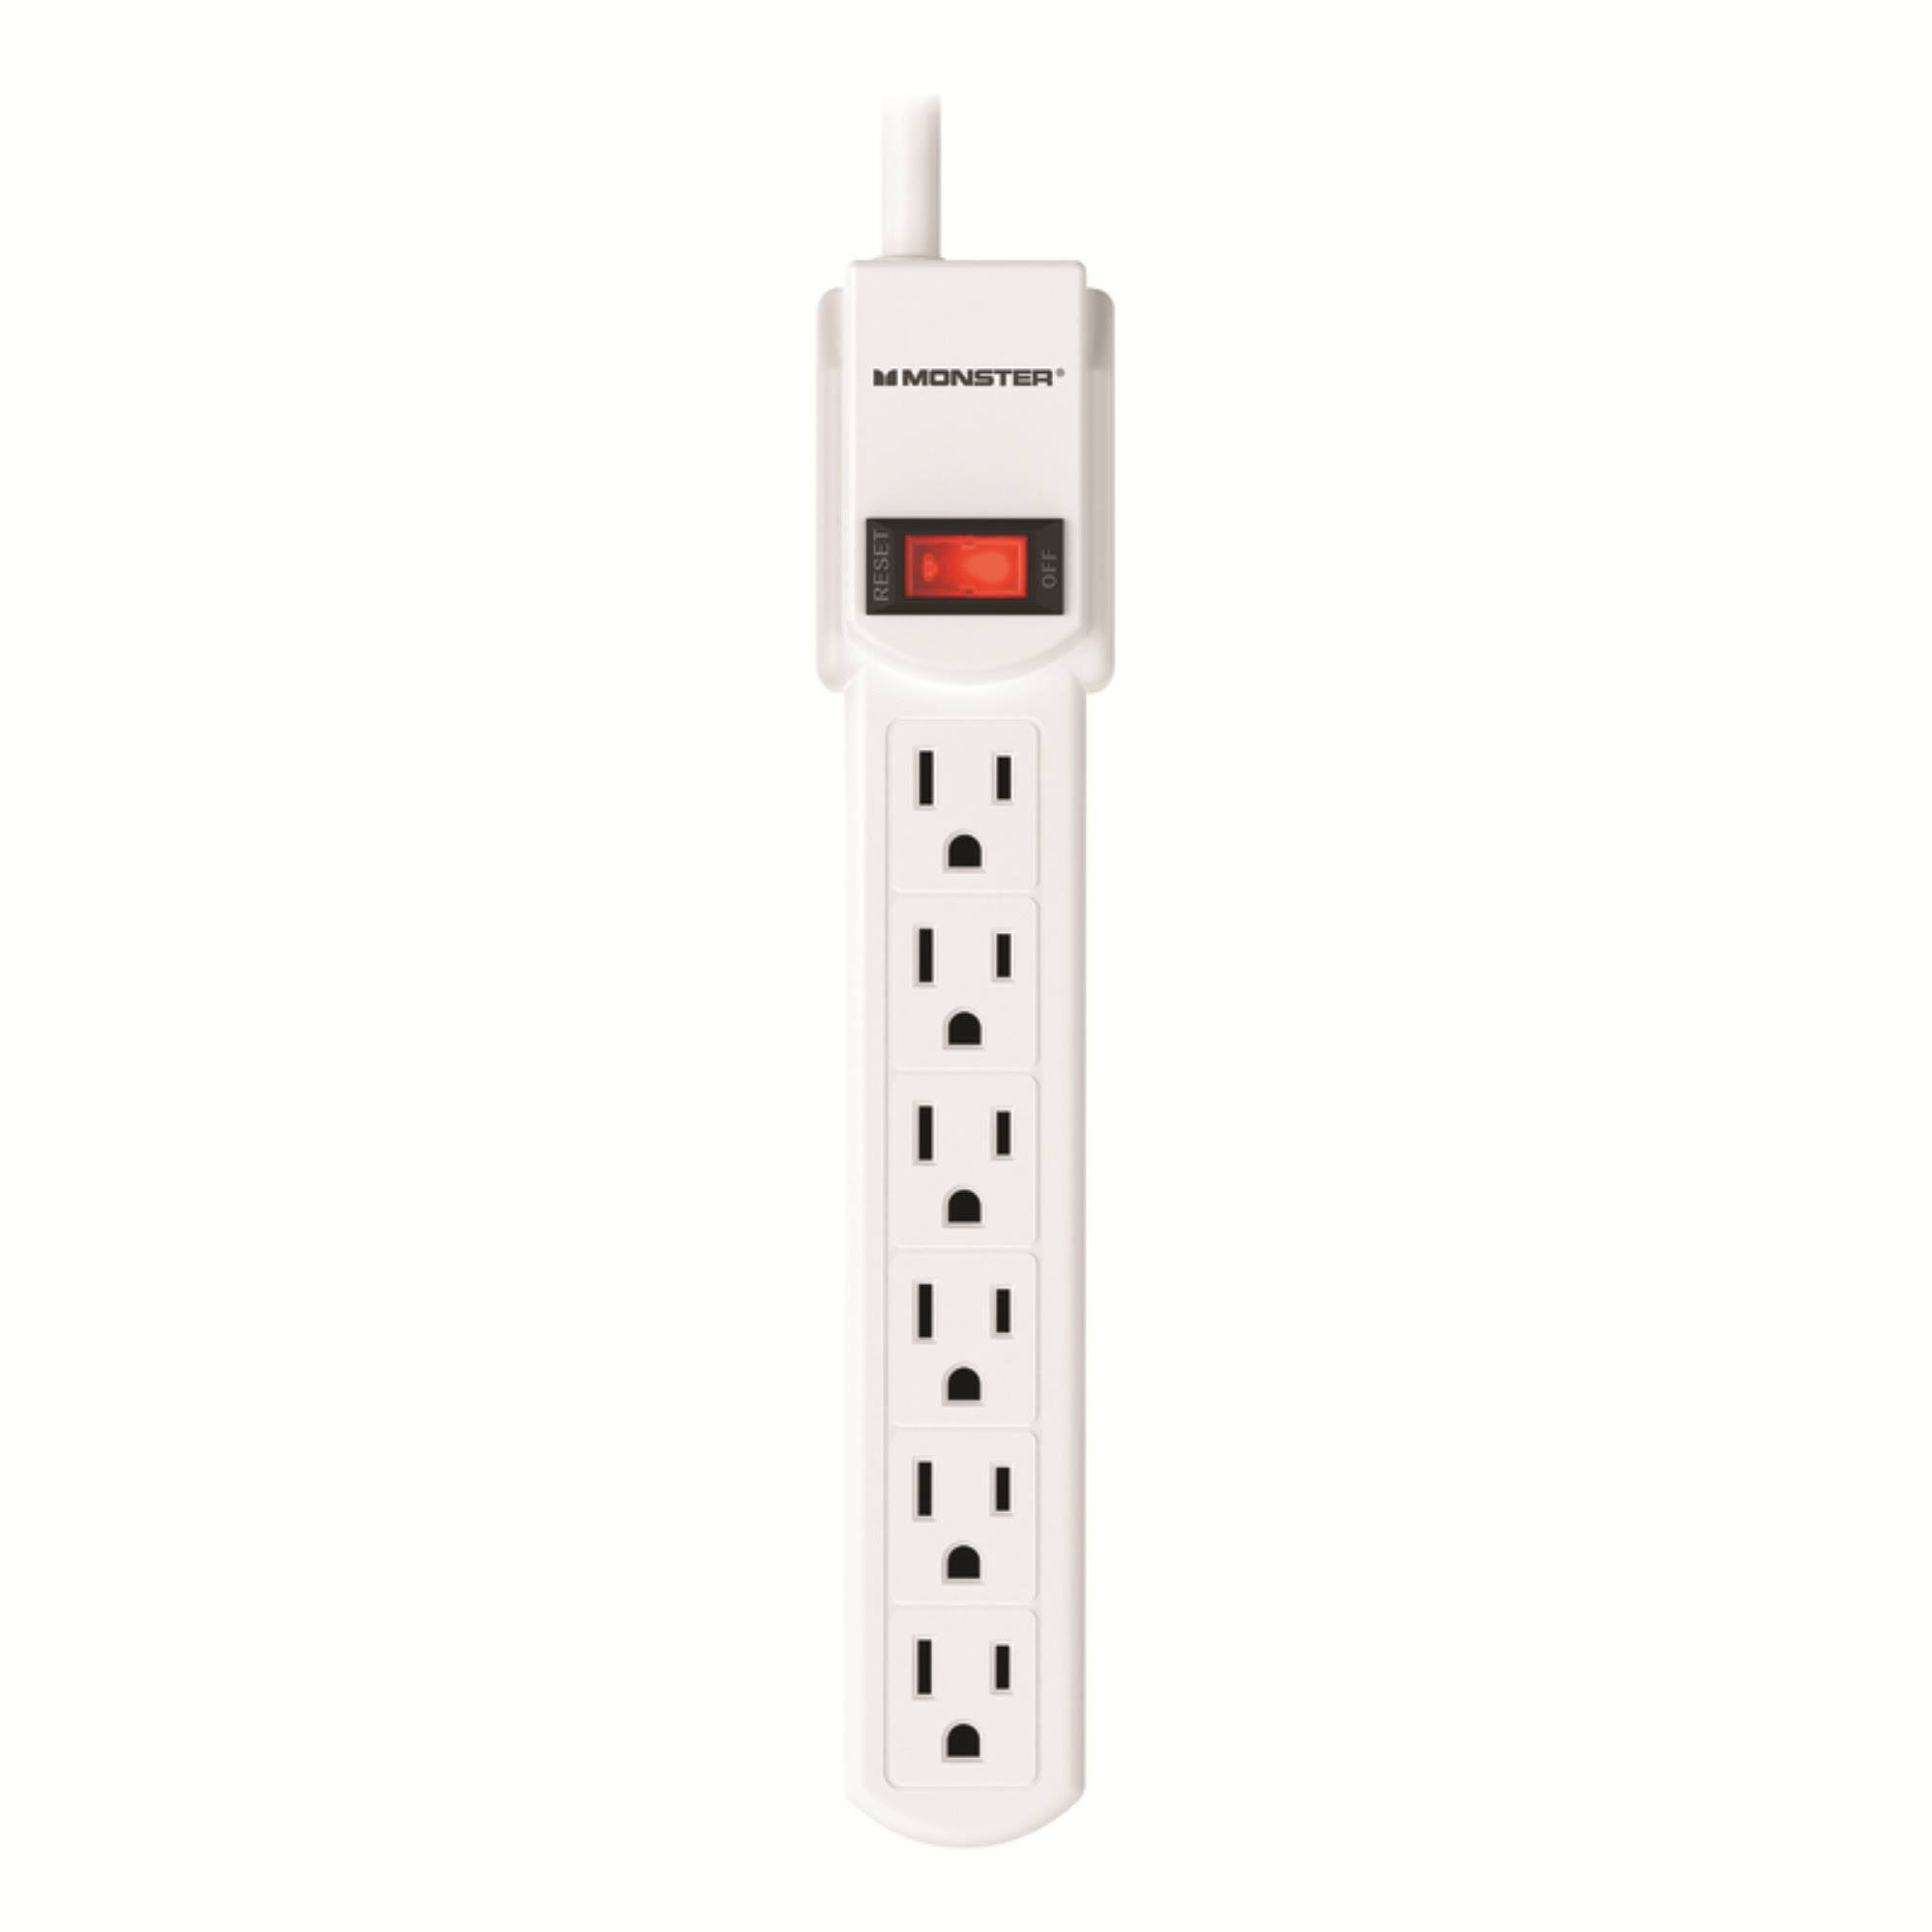 Monster 1700 Just Power It Up Power Strip - 1875W, 125V